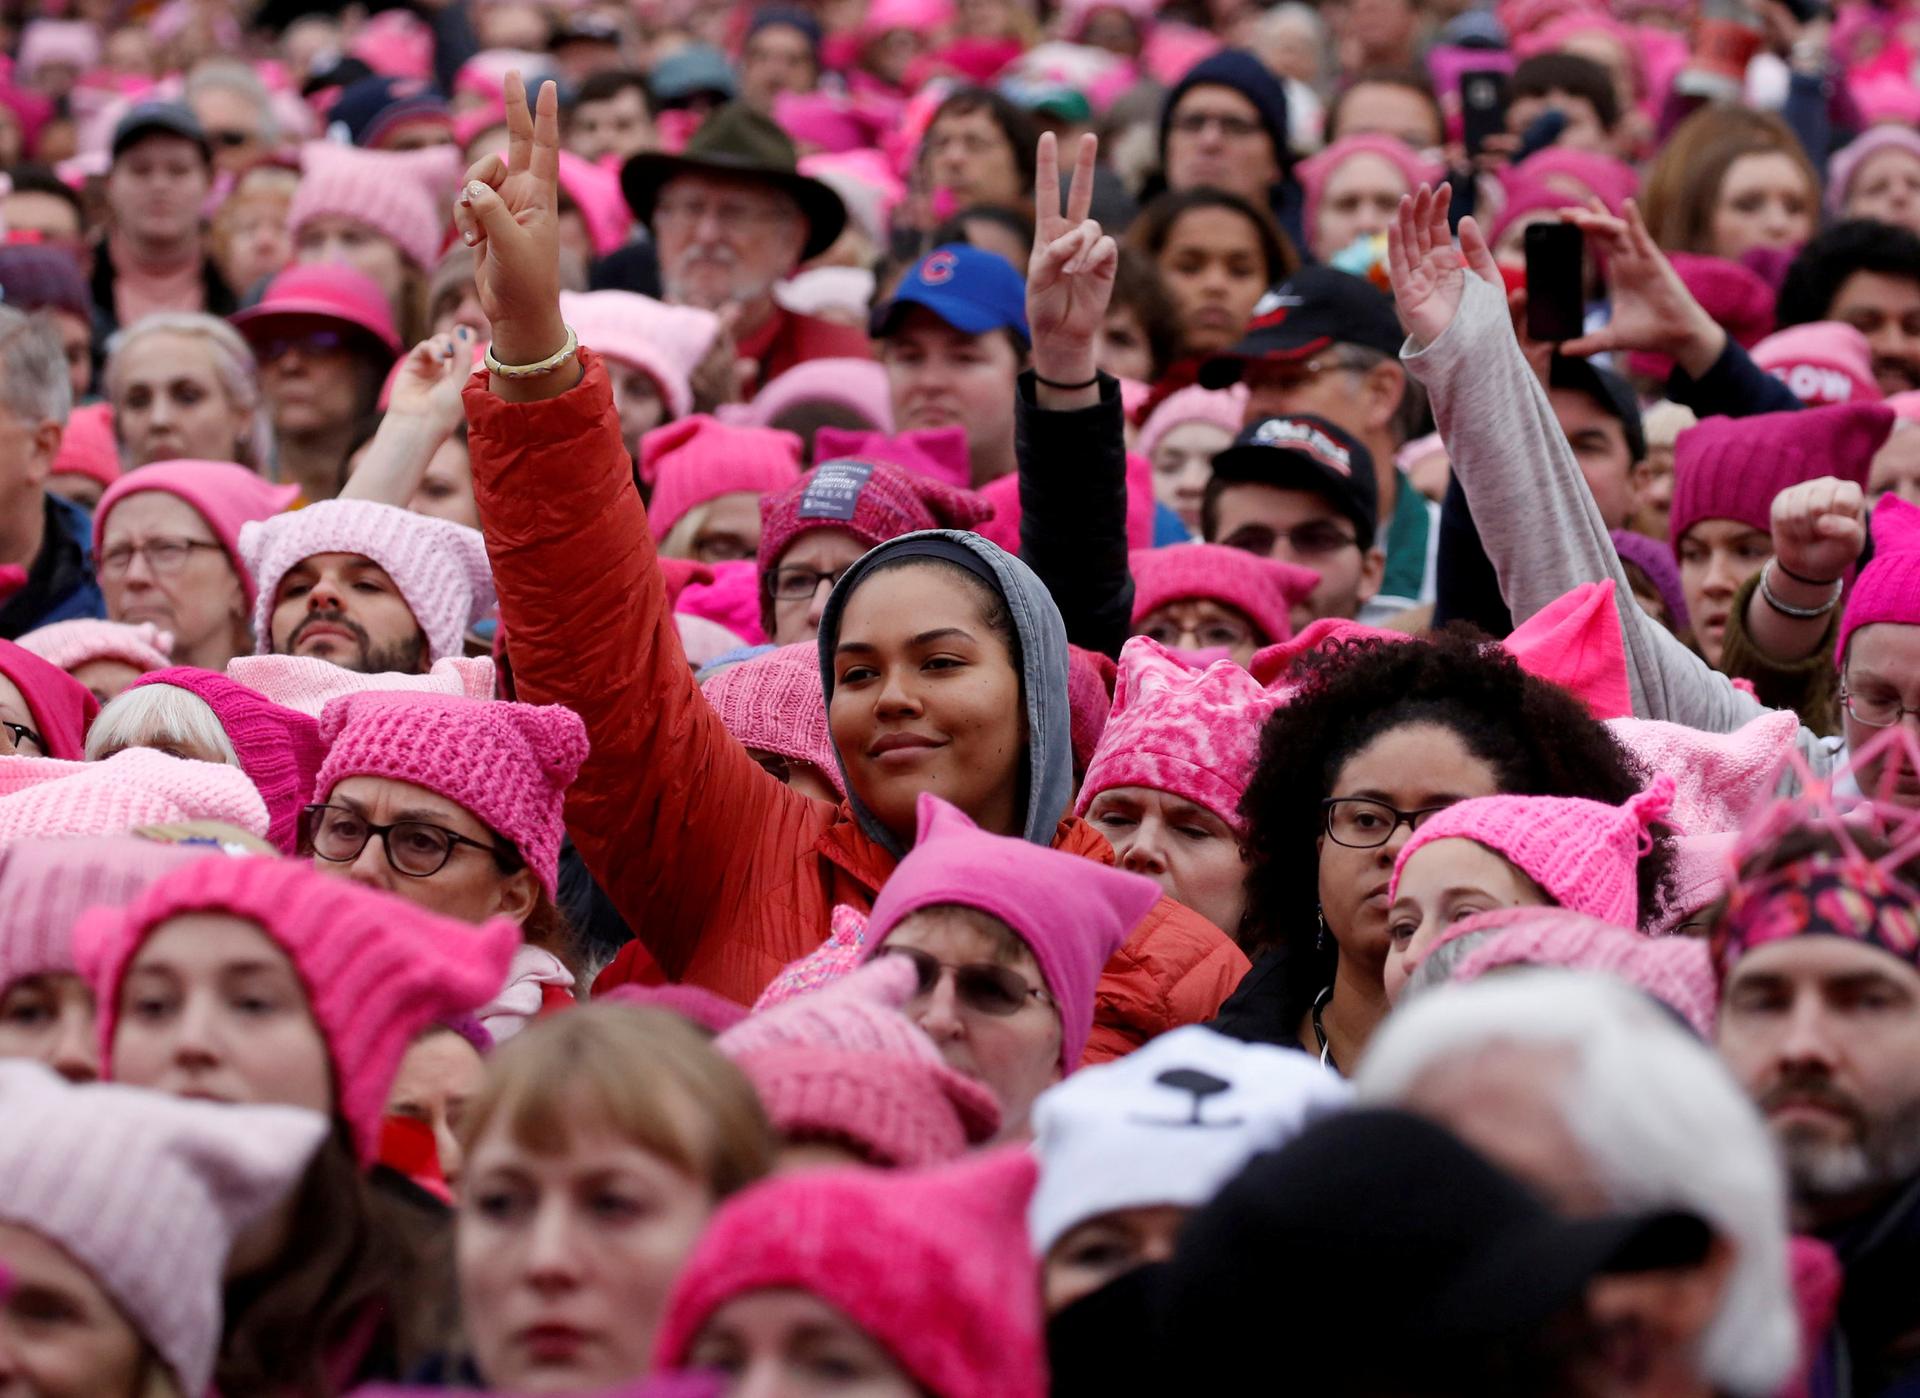 People gather for the Women's March in Washington, DC, January 21, 2017.